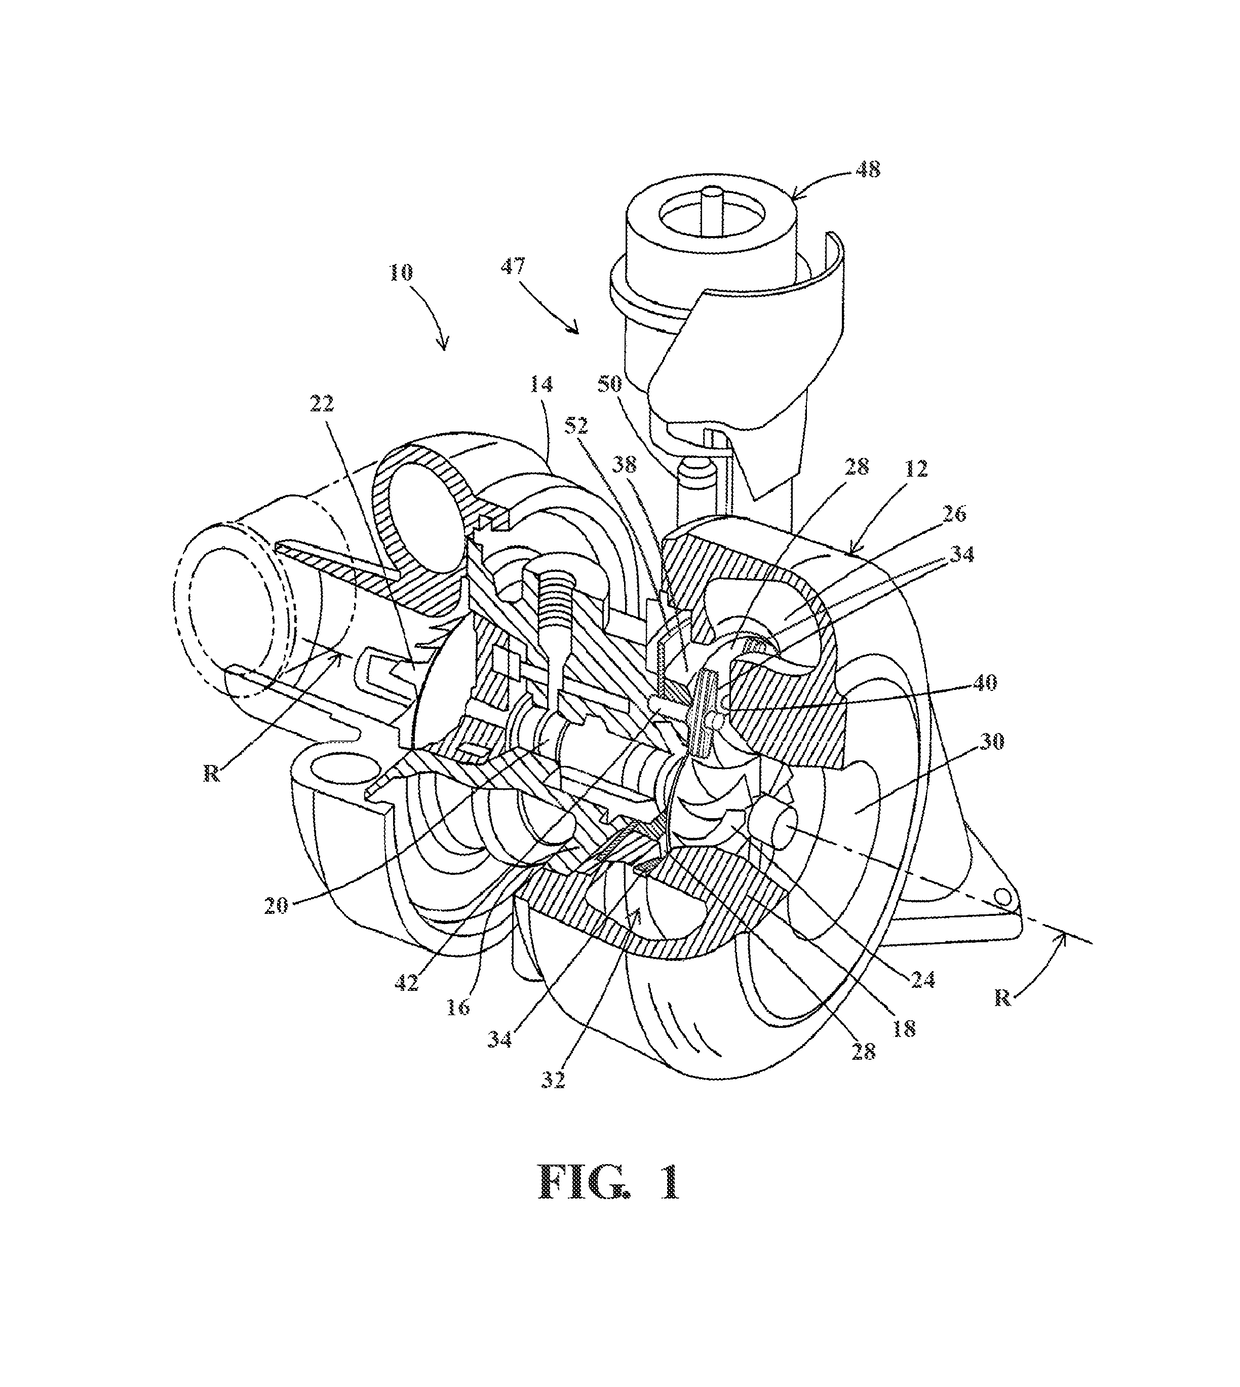 Turbocharger with variable turbine geometry having grooved guide vanes